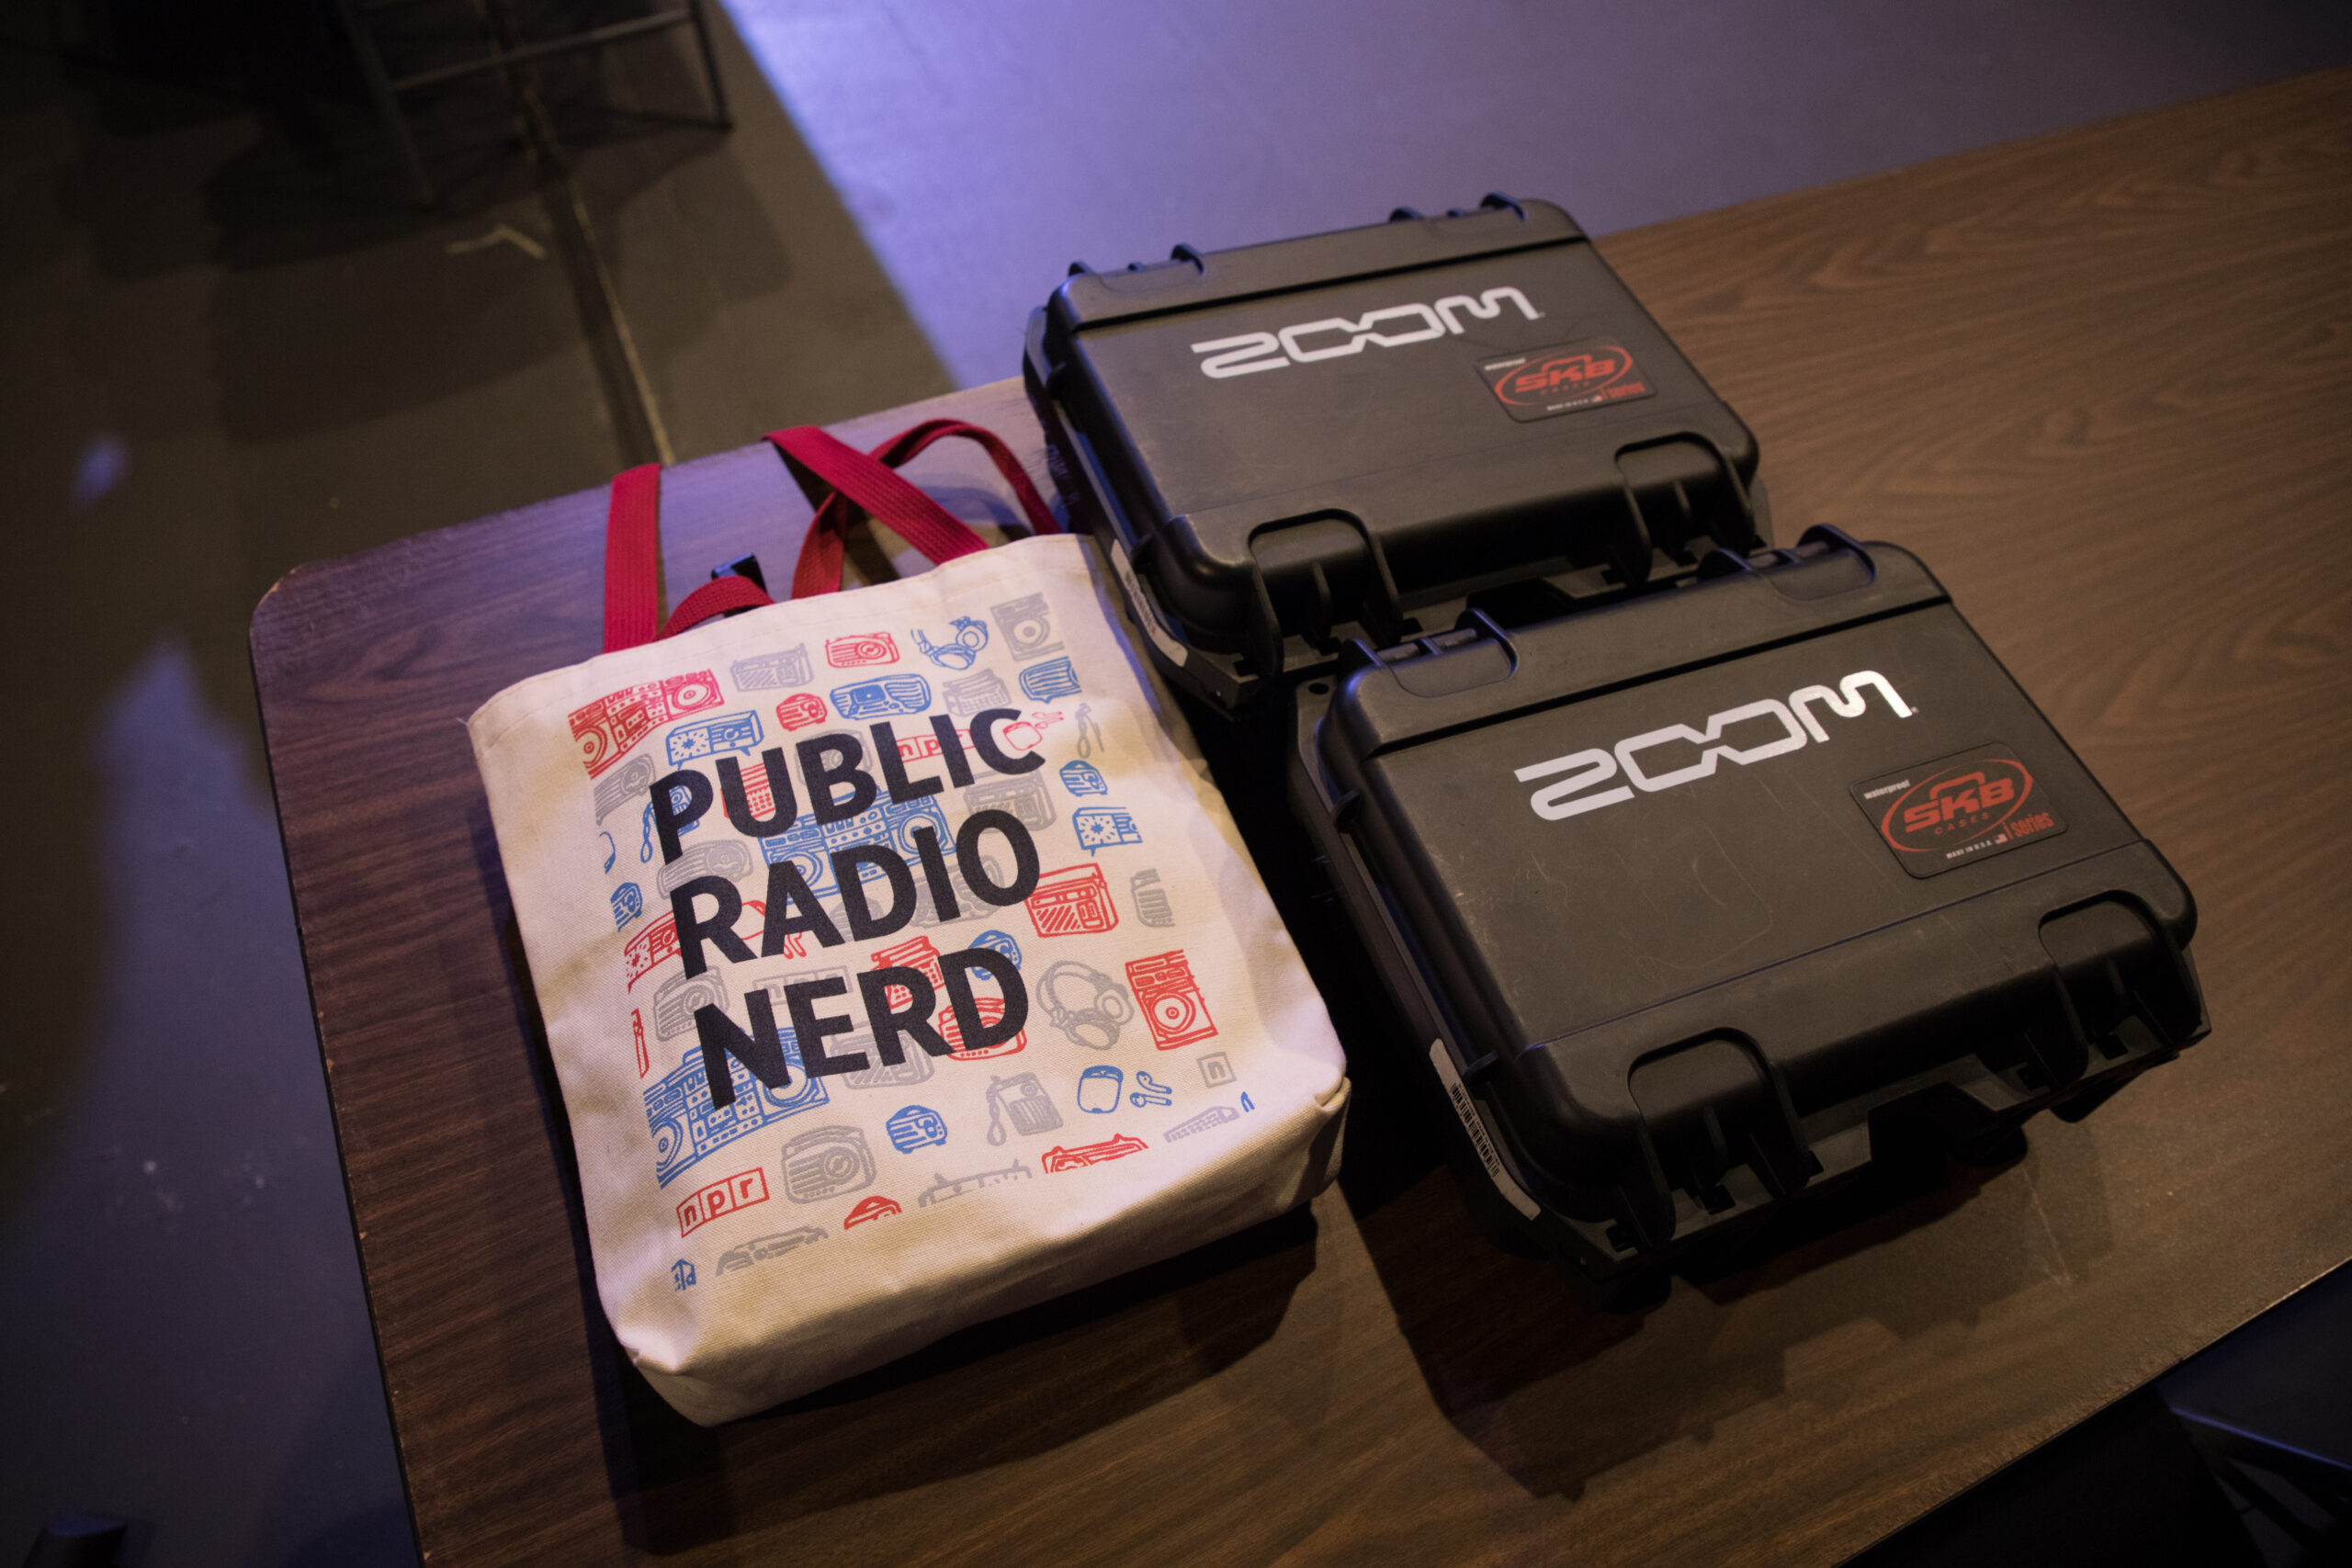 On the left, a tan tote bag that says “public radio nerd” lies on a table. Two black tool cases with the word “Zoom” labeled on the outside are also on the table.